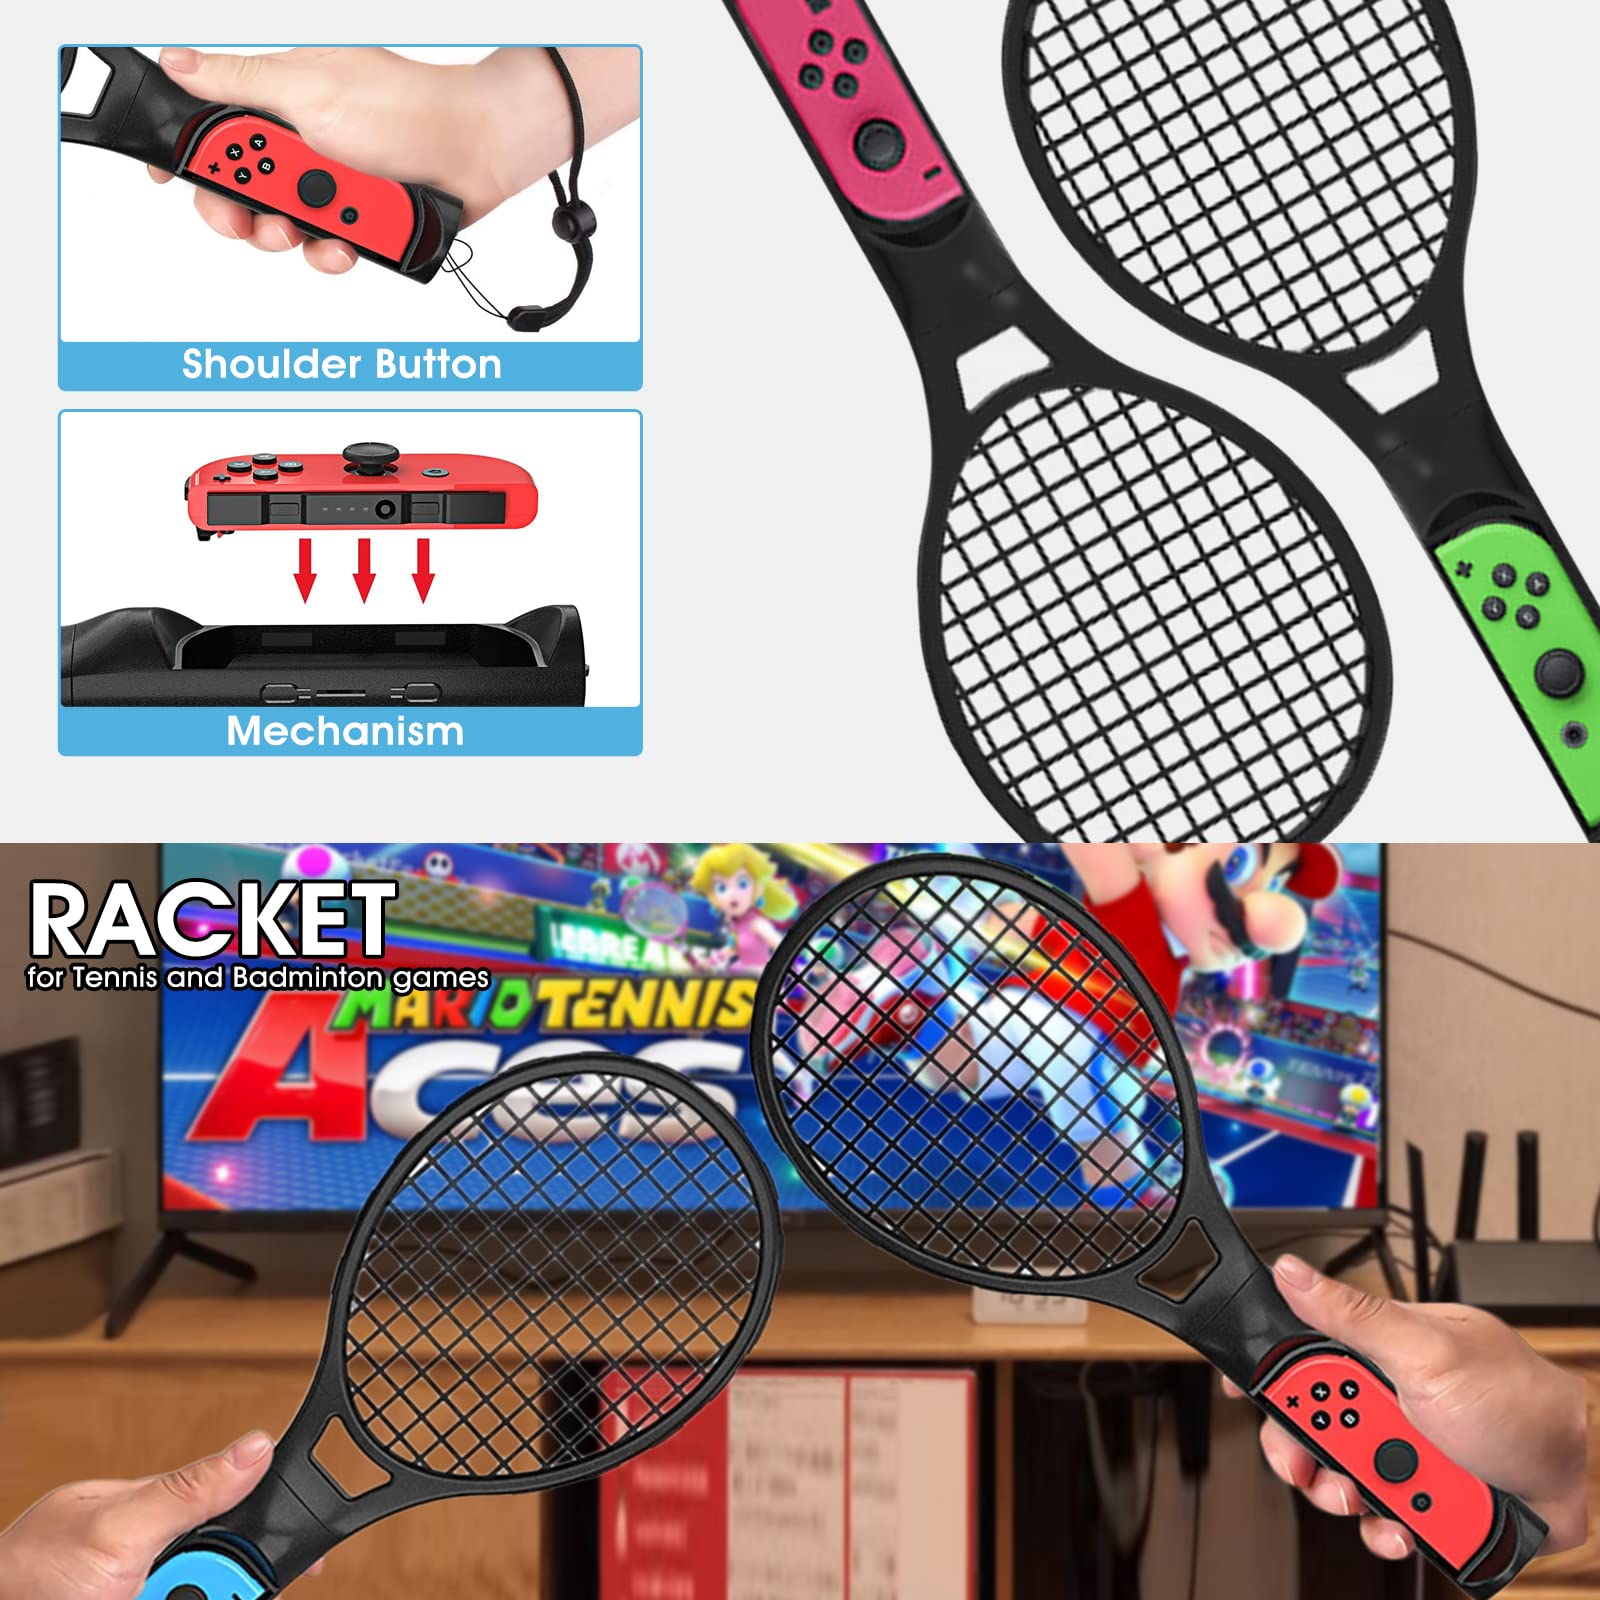 GOYERRNES for Switch Accessories Bundle Set for Nintendo Family Switch Sports Game Controllers with Tennis Rackets, Golf Clubs, Soccer Leg Straps,Wrist Bands & Joycon Grips